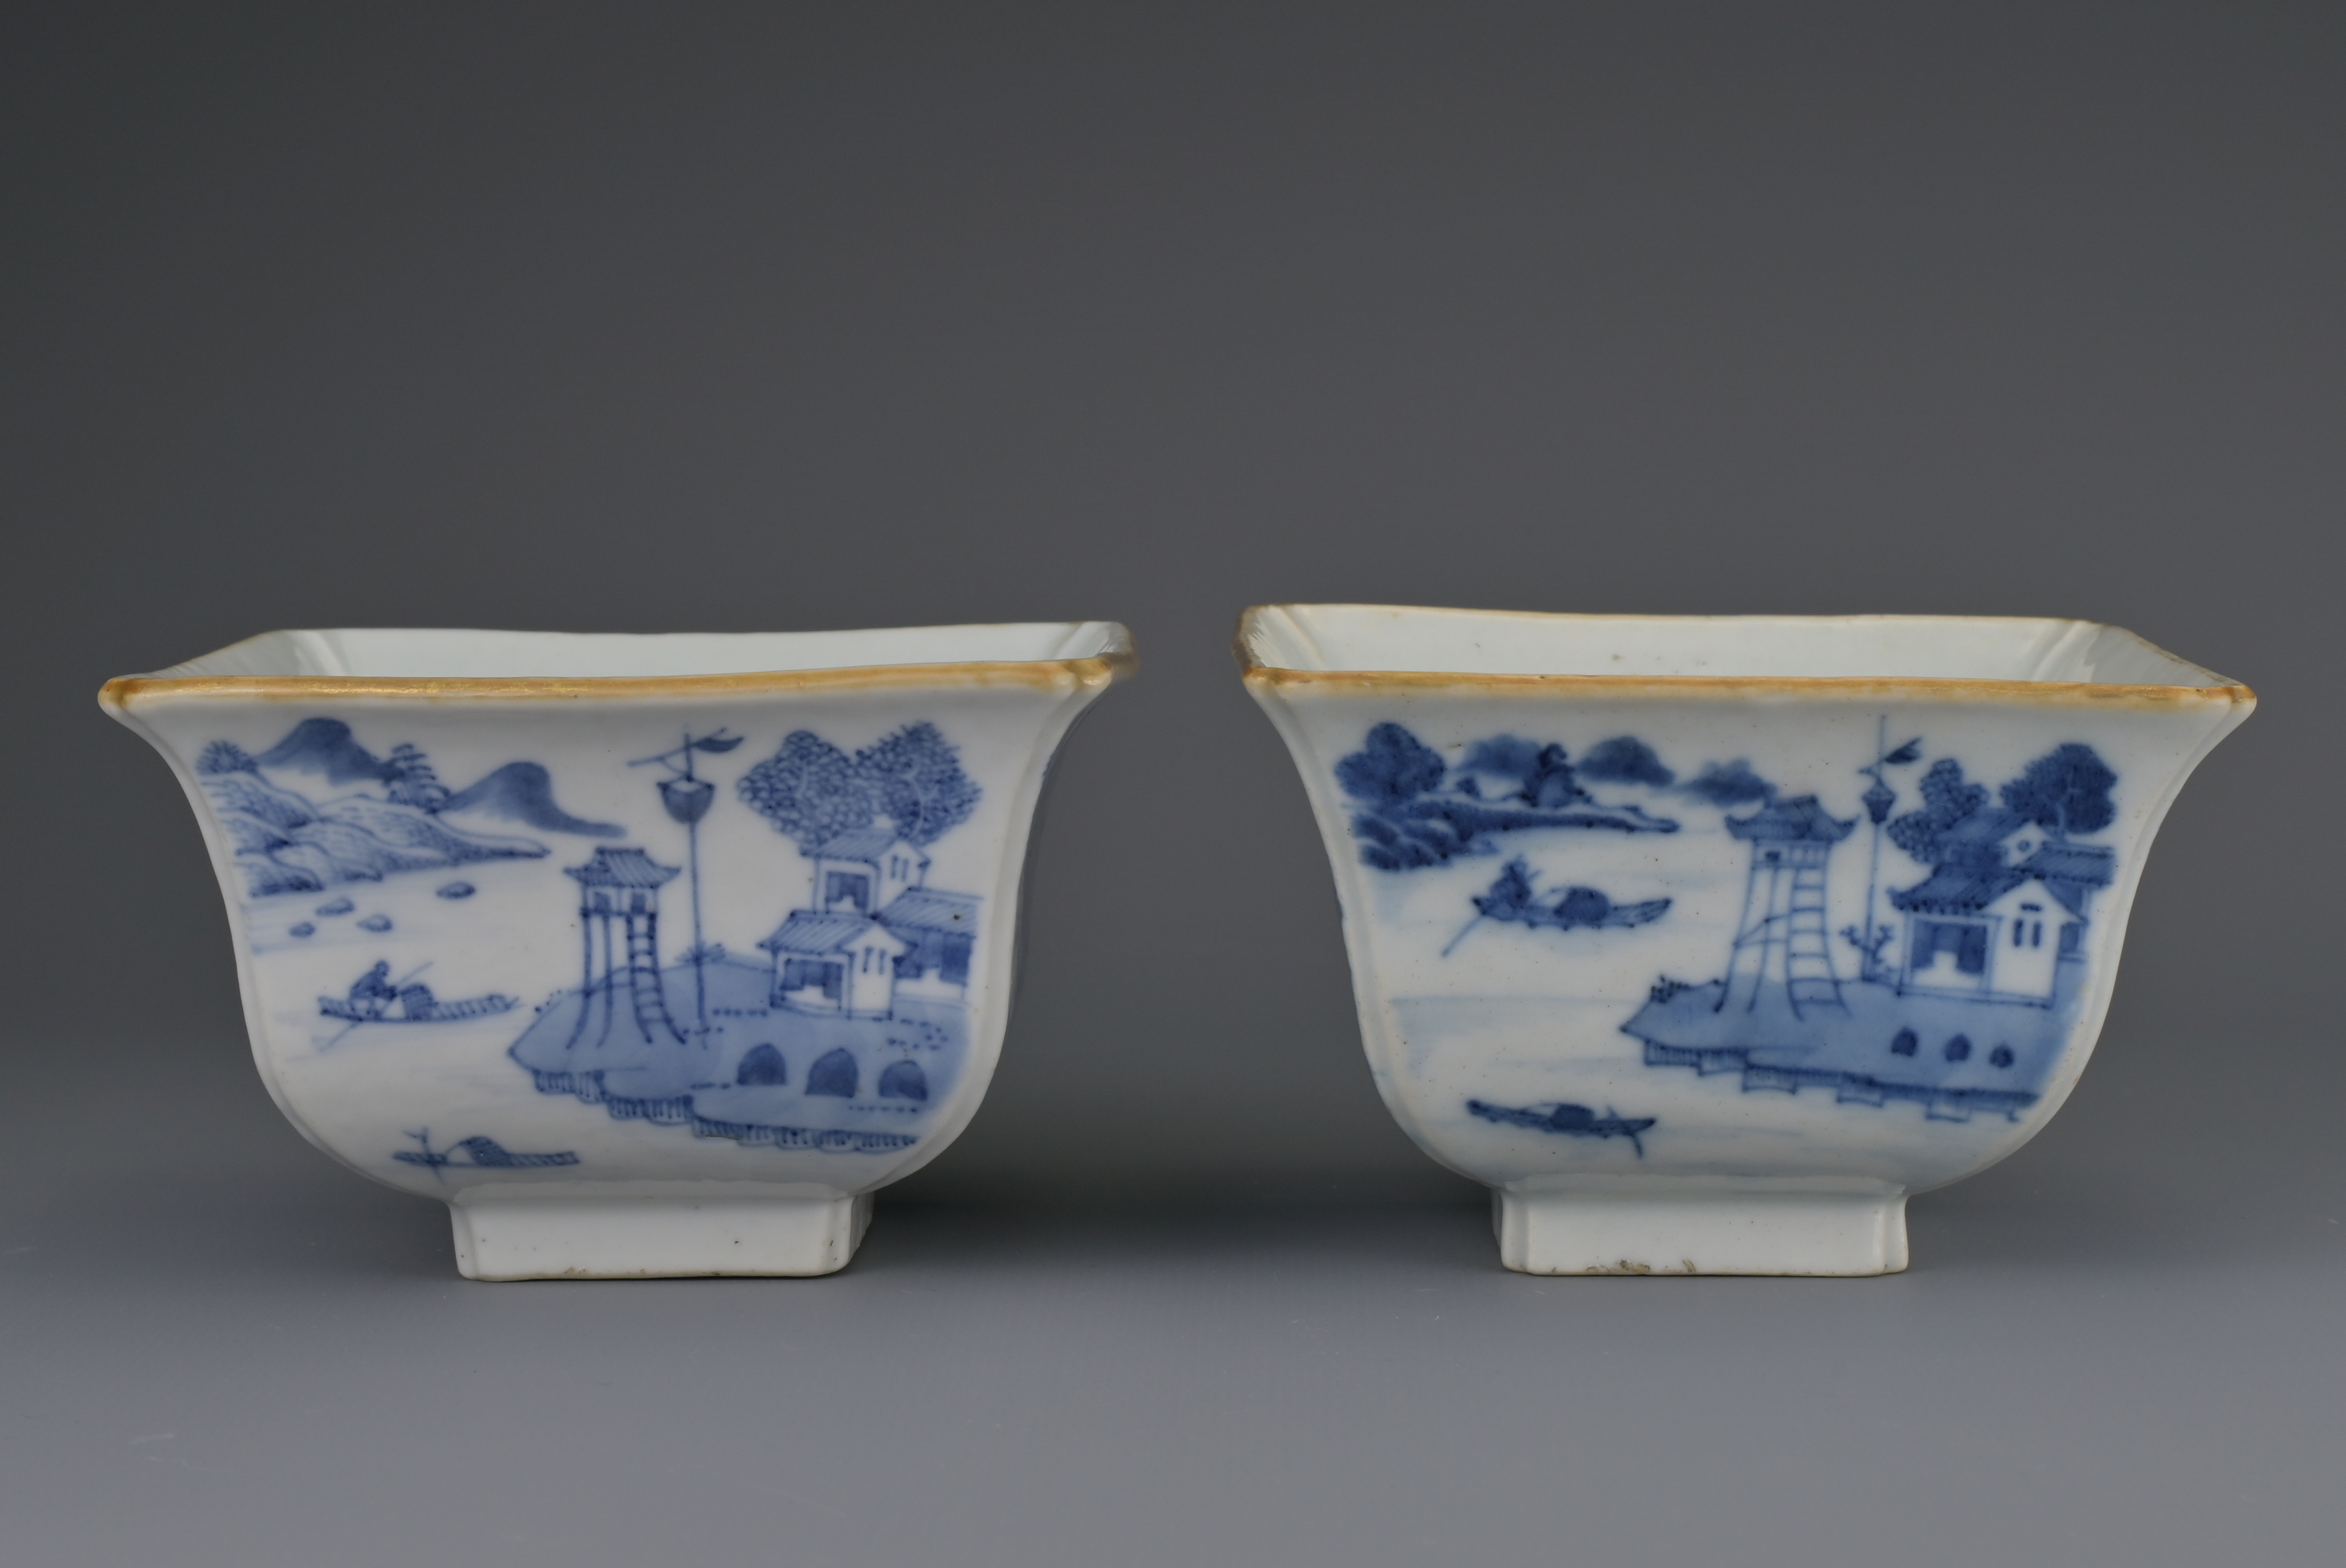 PAIR OF CHINESE BLUE AND WHITE PORCELAIN BOWLS, DAOGUANG MARK AND PERIOD, 19th CENTURY - Image 5 of 9